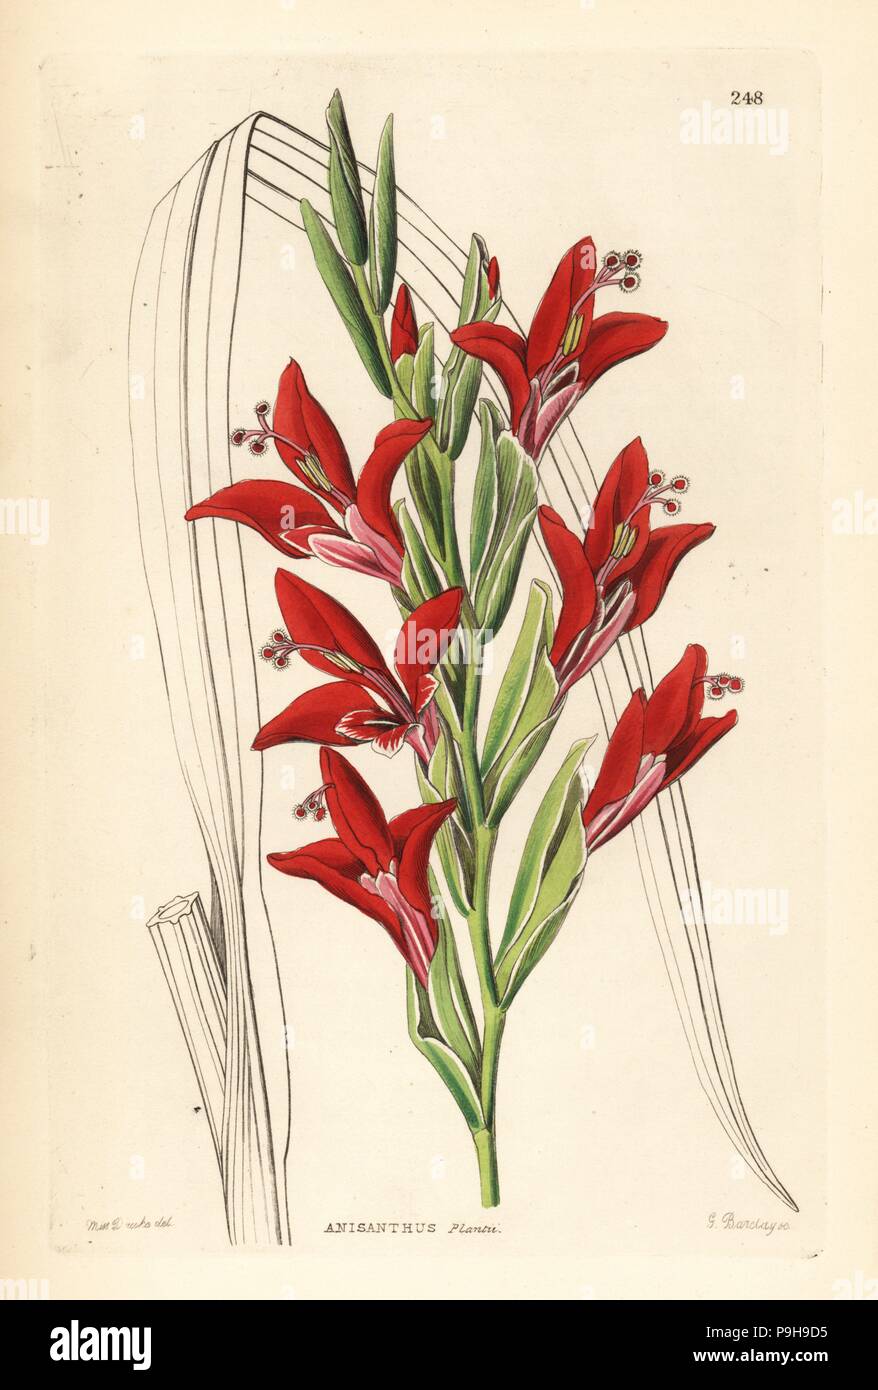 Painted lady gladiolus, Gladiolus splendens (Plant's anisanth, Anisanthus plantii). Handcoloured copperplate engraving by G. Barclay after Miss Sarah Drake from John Lindley and Robert Sweet's Ornamental Flower Garden and Shrubbery, G. Willis, London, 1854. Stock Photo